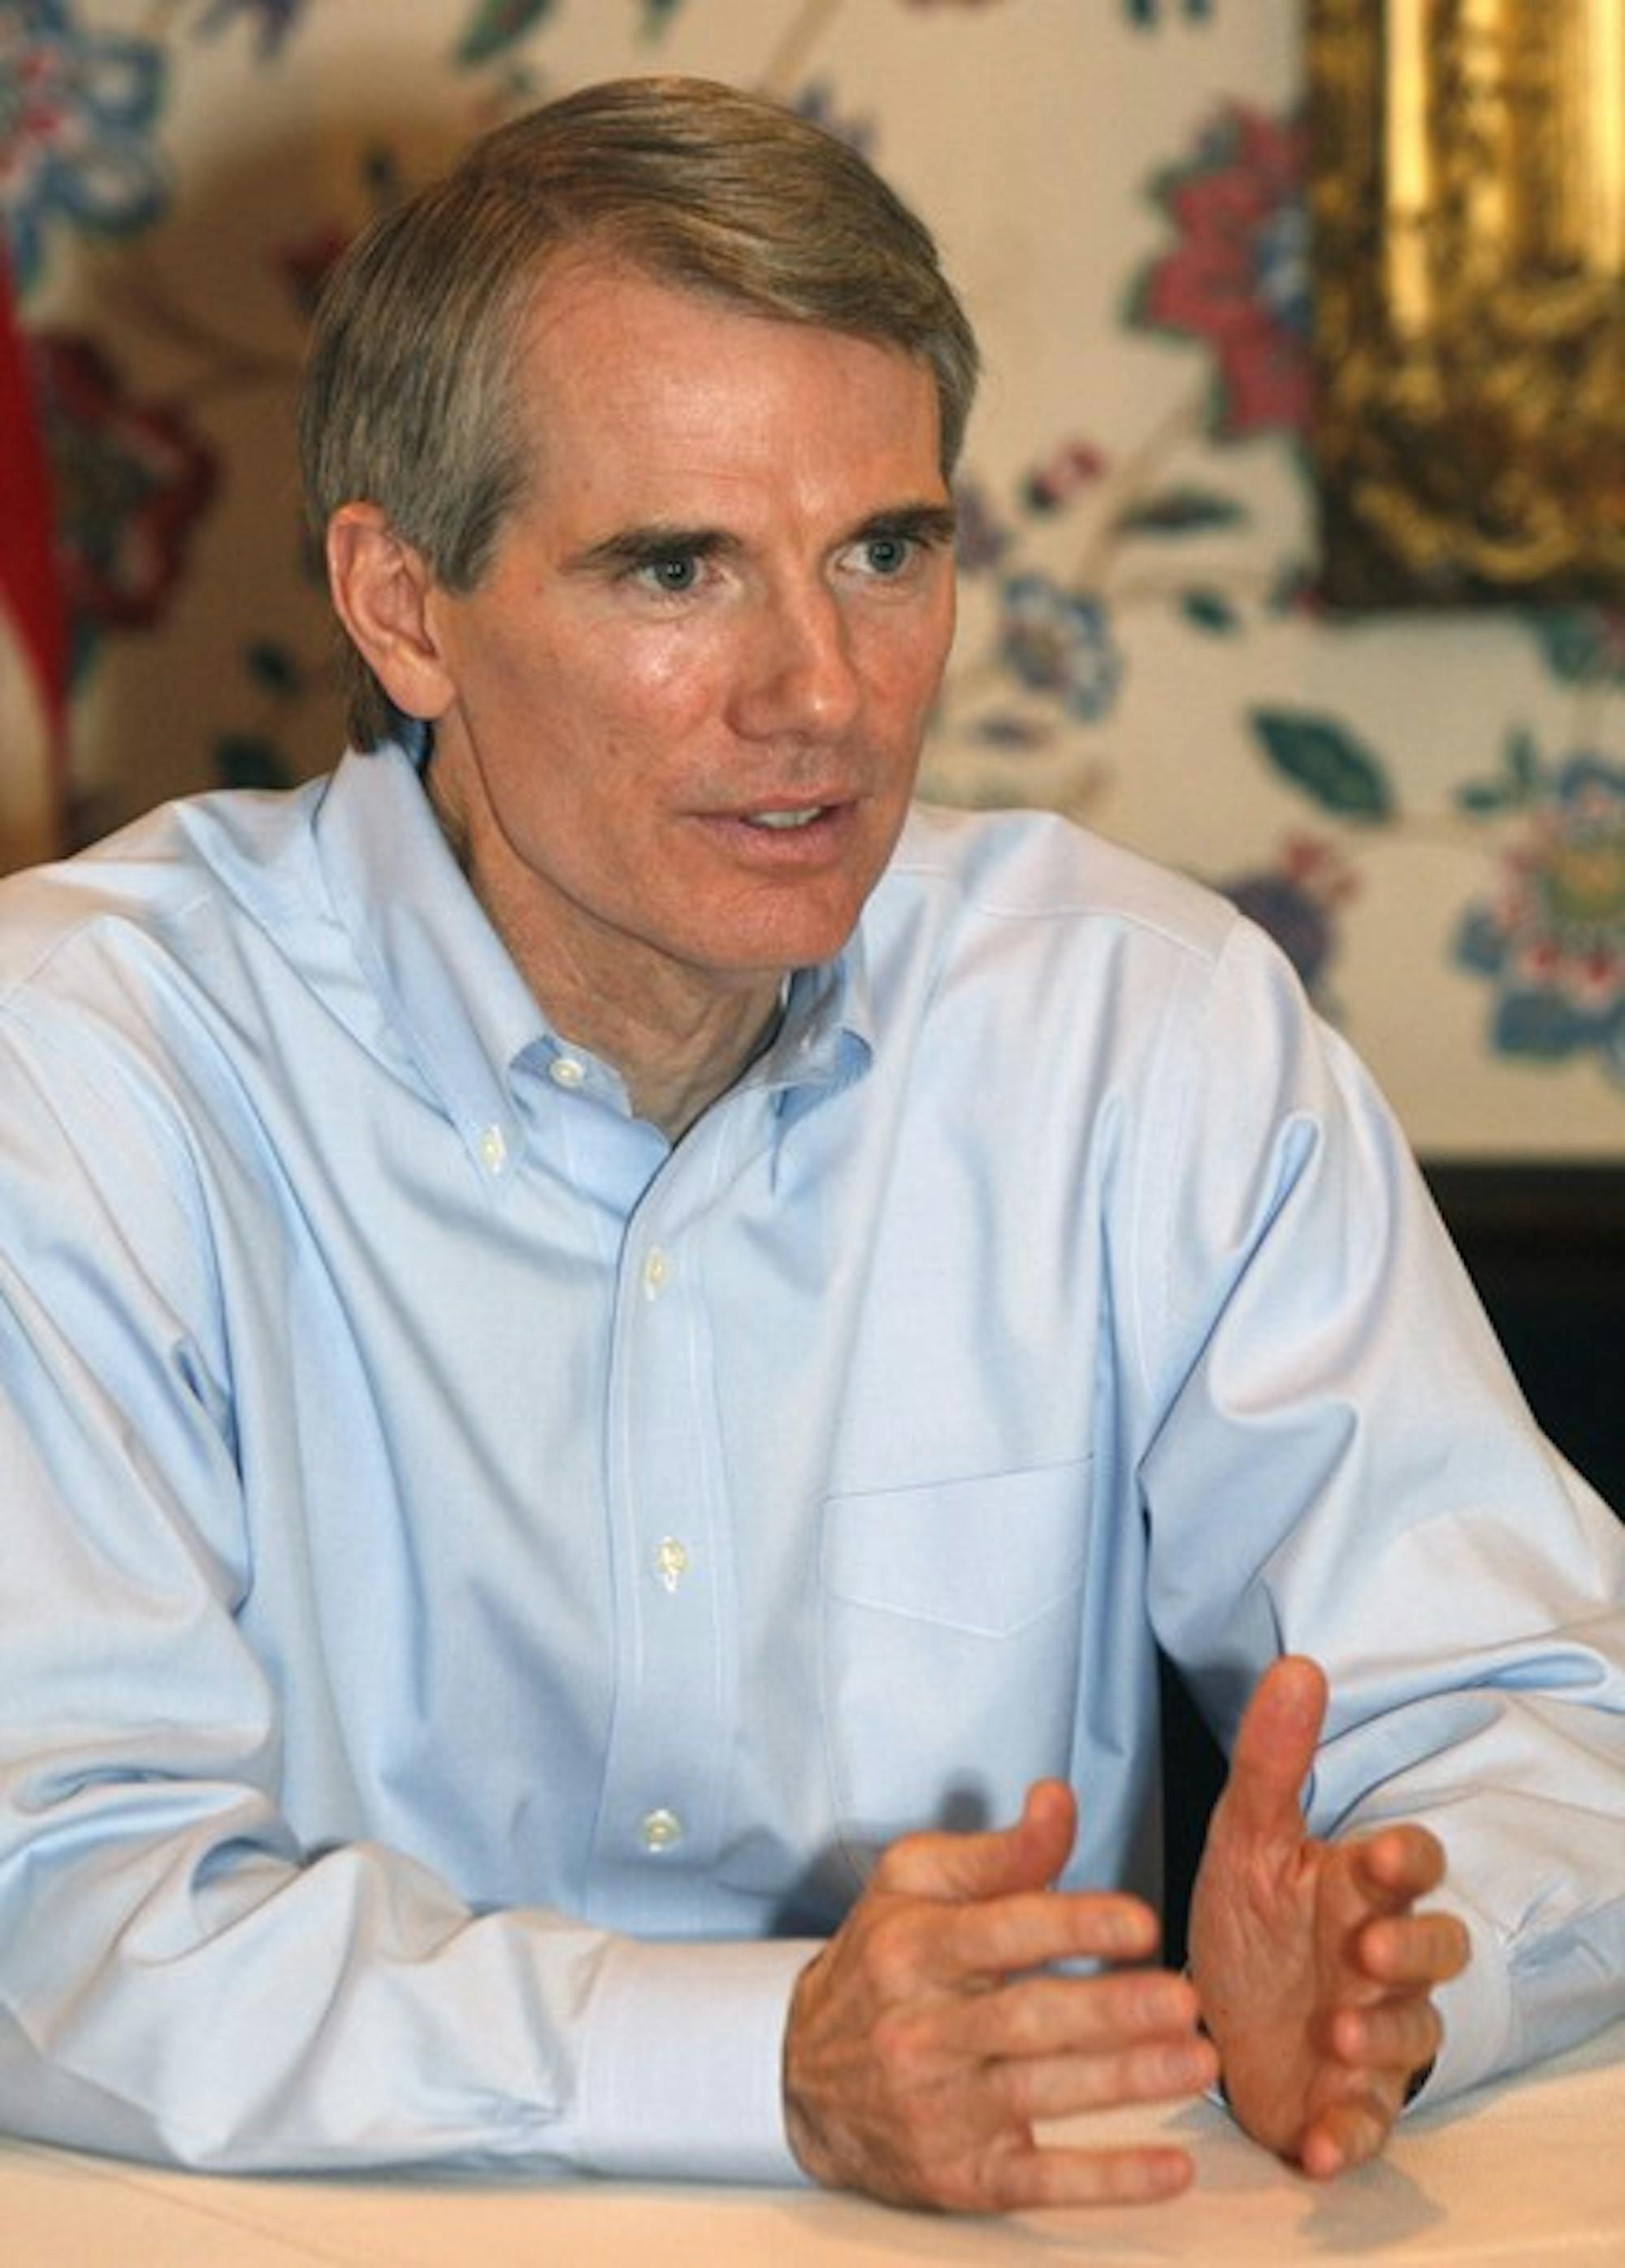 Former congressman Rob Portman '78, who served under both Bush administrations, is now on the short list of Republican vice presidential candidates.